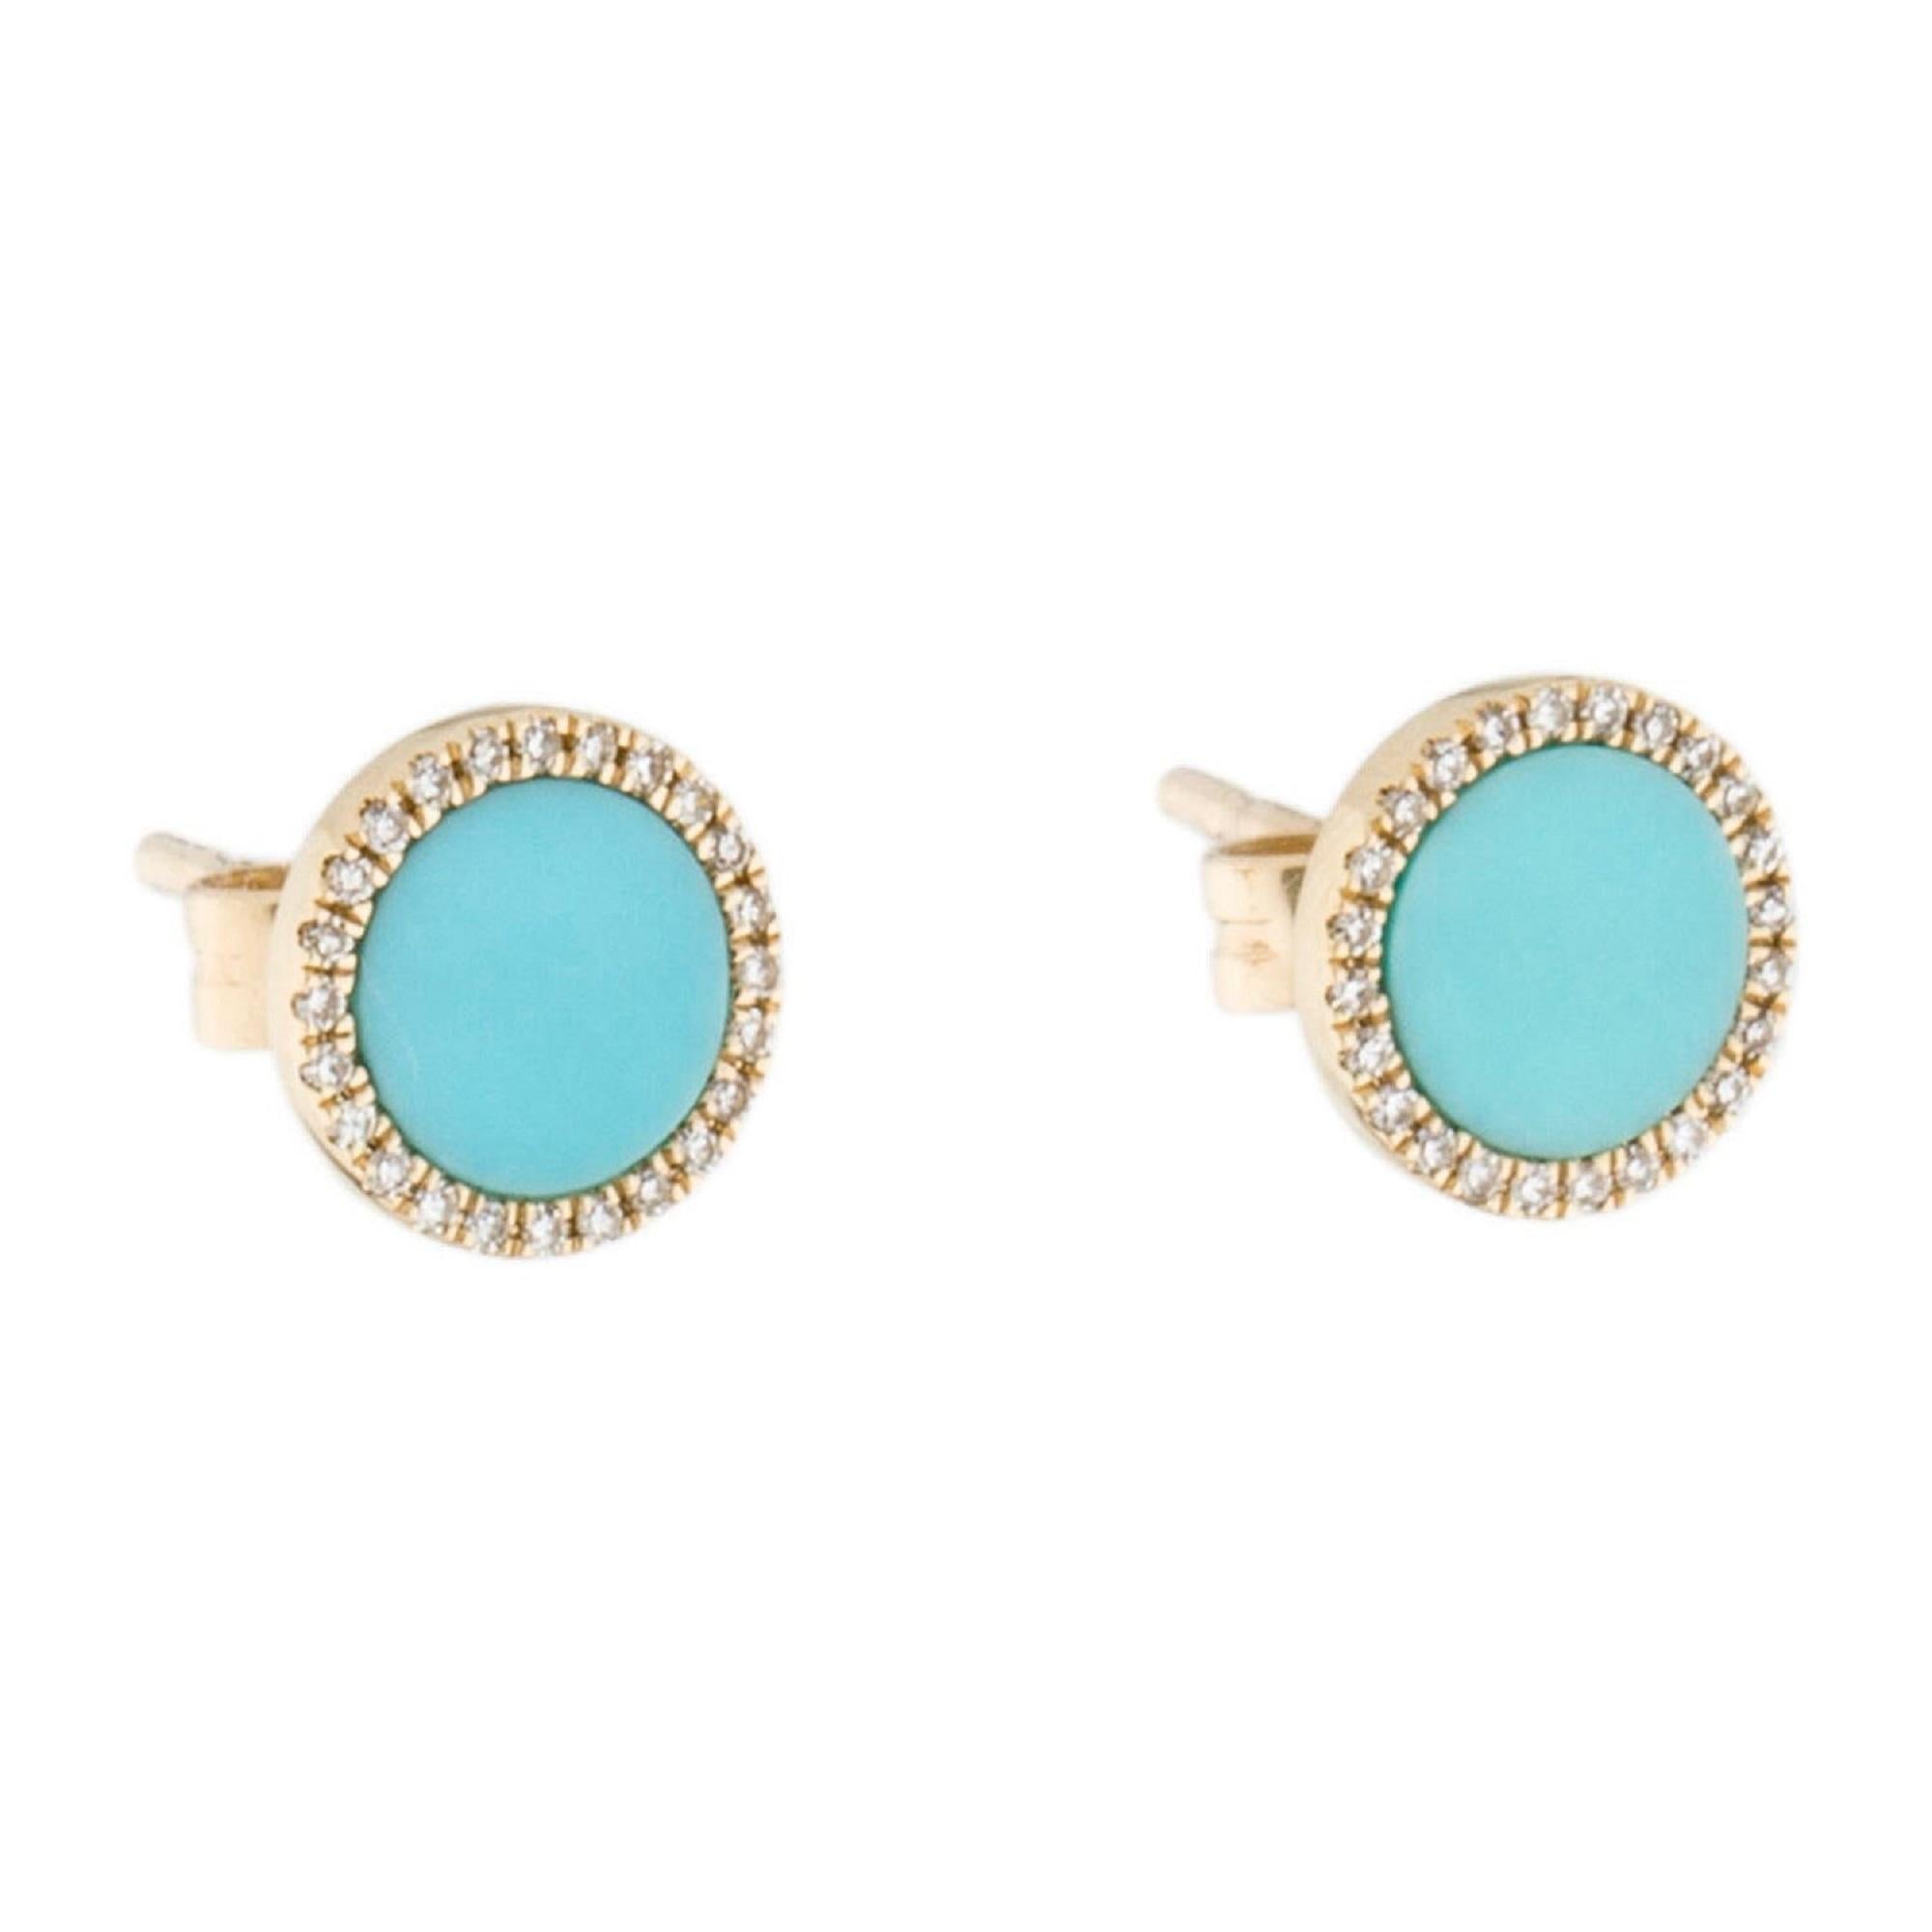 Show off your unique style with these striking diamond and turquoise disc Studs earrings. The earrings are crafted in 14k yellow gold and feature approximately 0.10ct of genuine white diamonds. The earrings are secured with butterfly backs.  Diamond